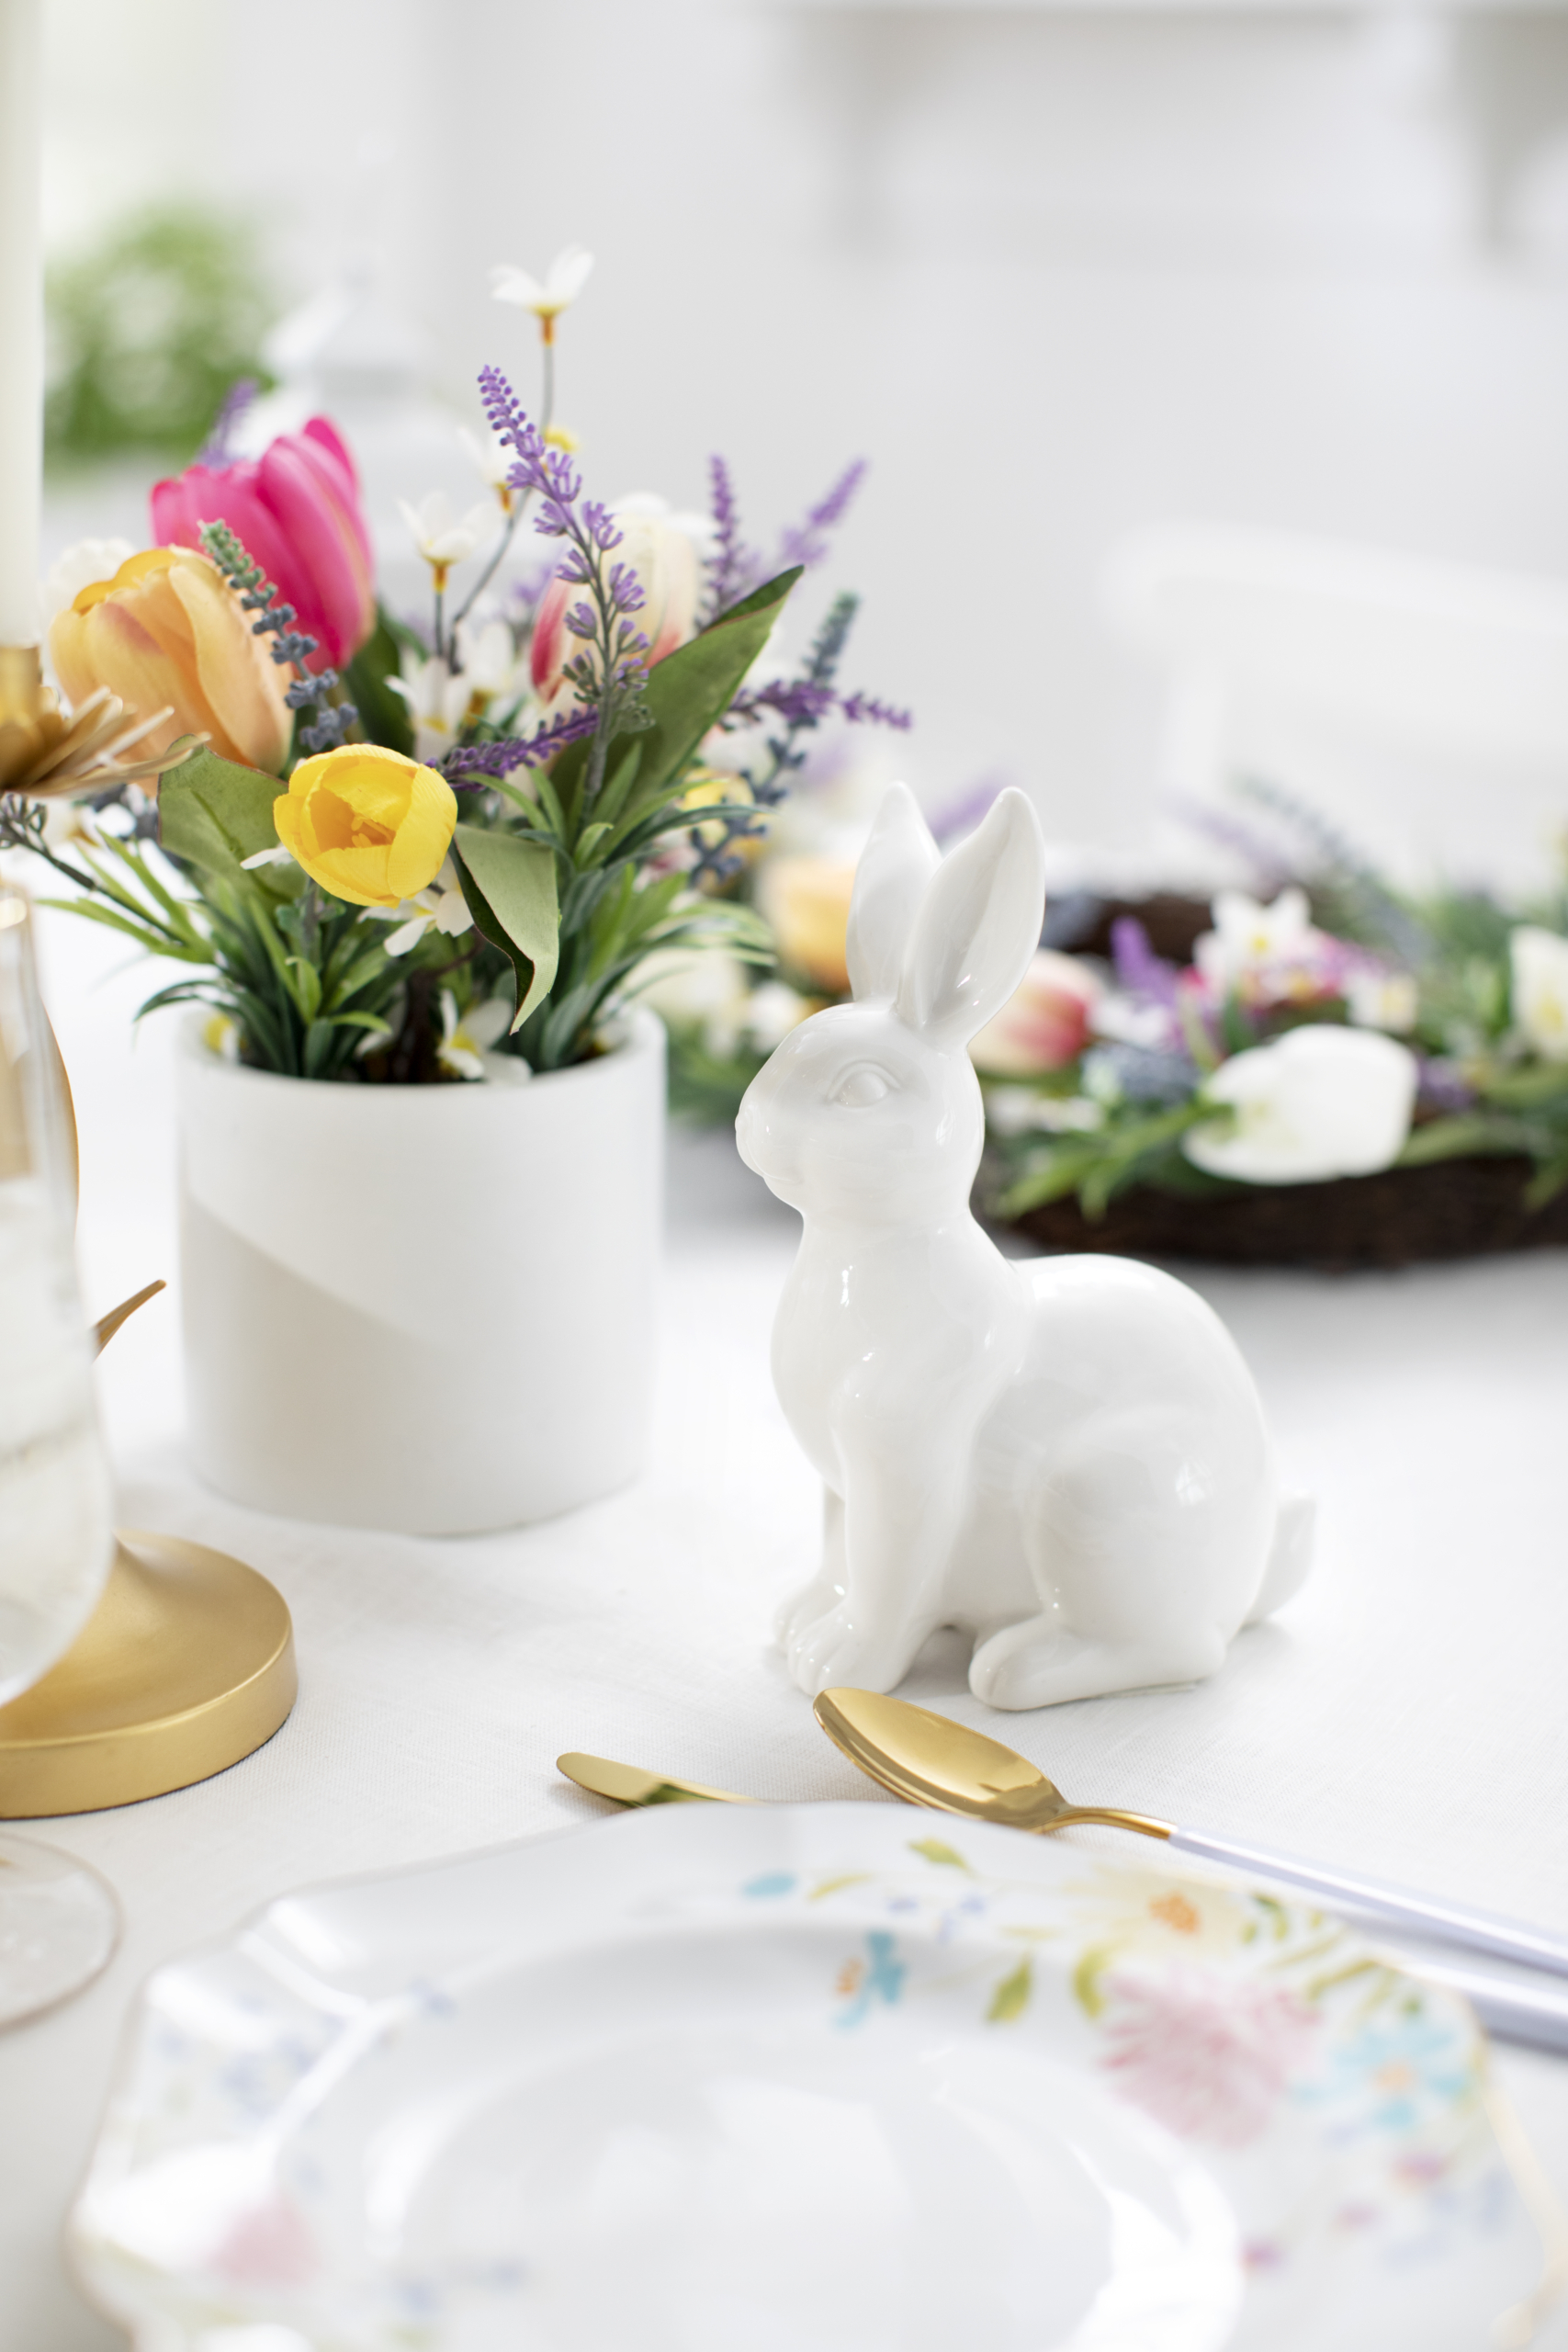 Martha Stewart Collection's Best Easter Decorations